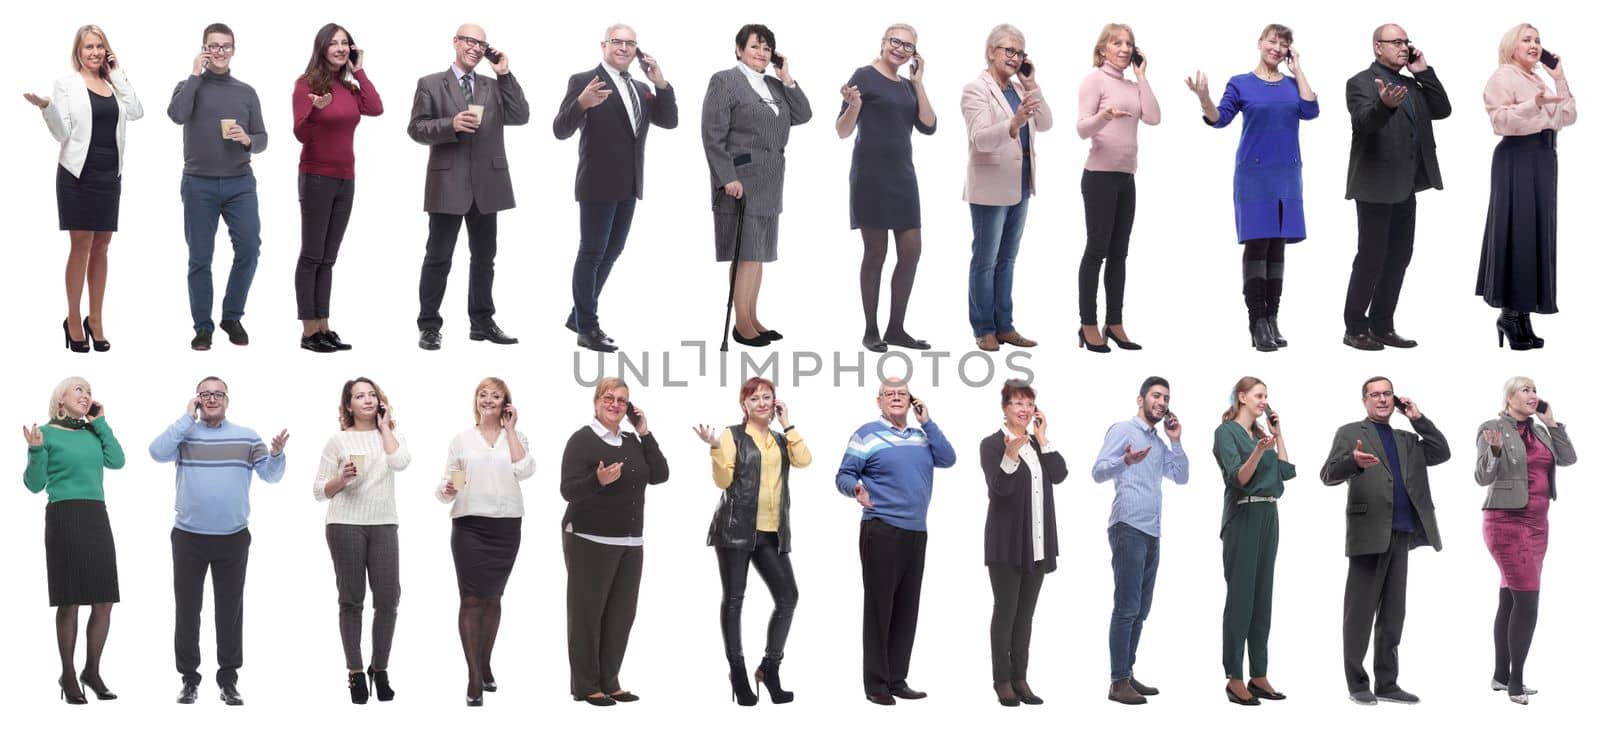 group of people holding phone in hand isolated on white background